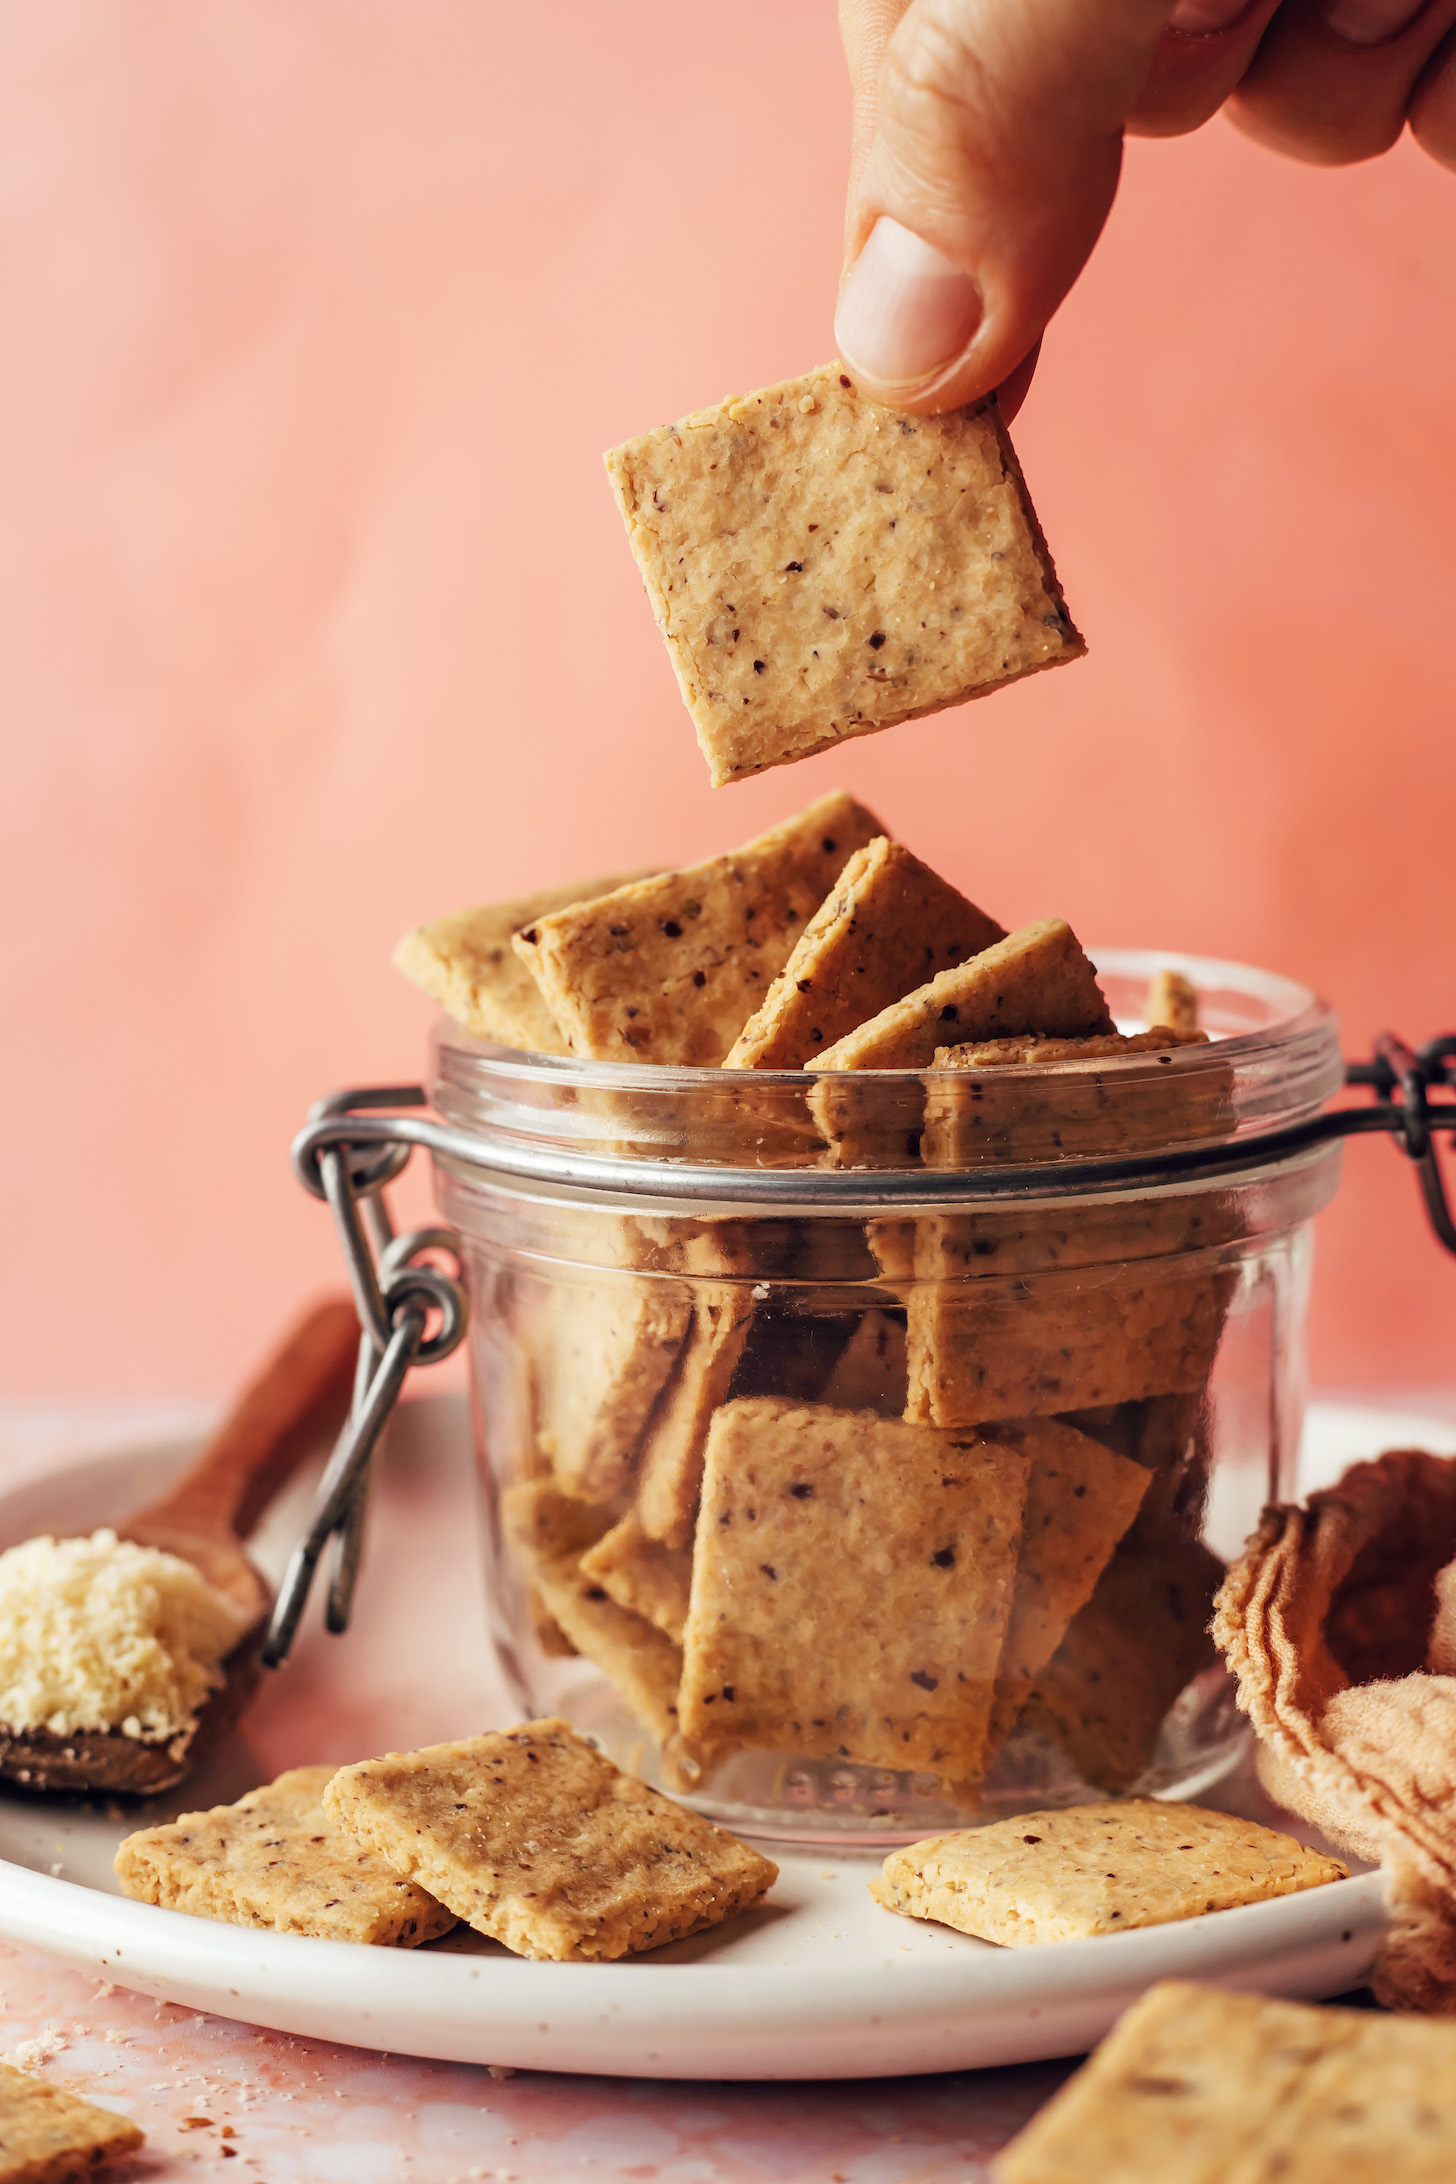 Holding a grain-free almond flour cracker above a jar of more crackers